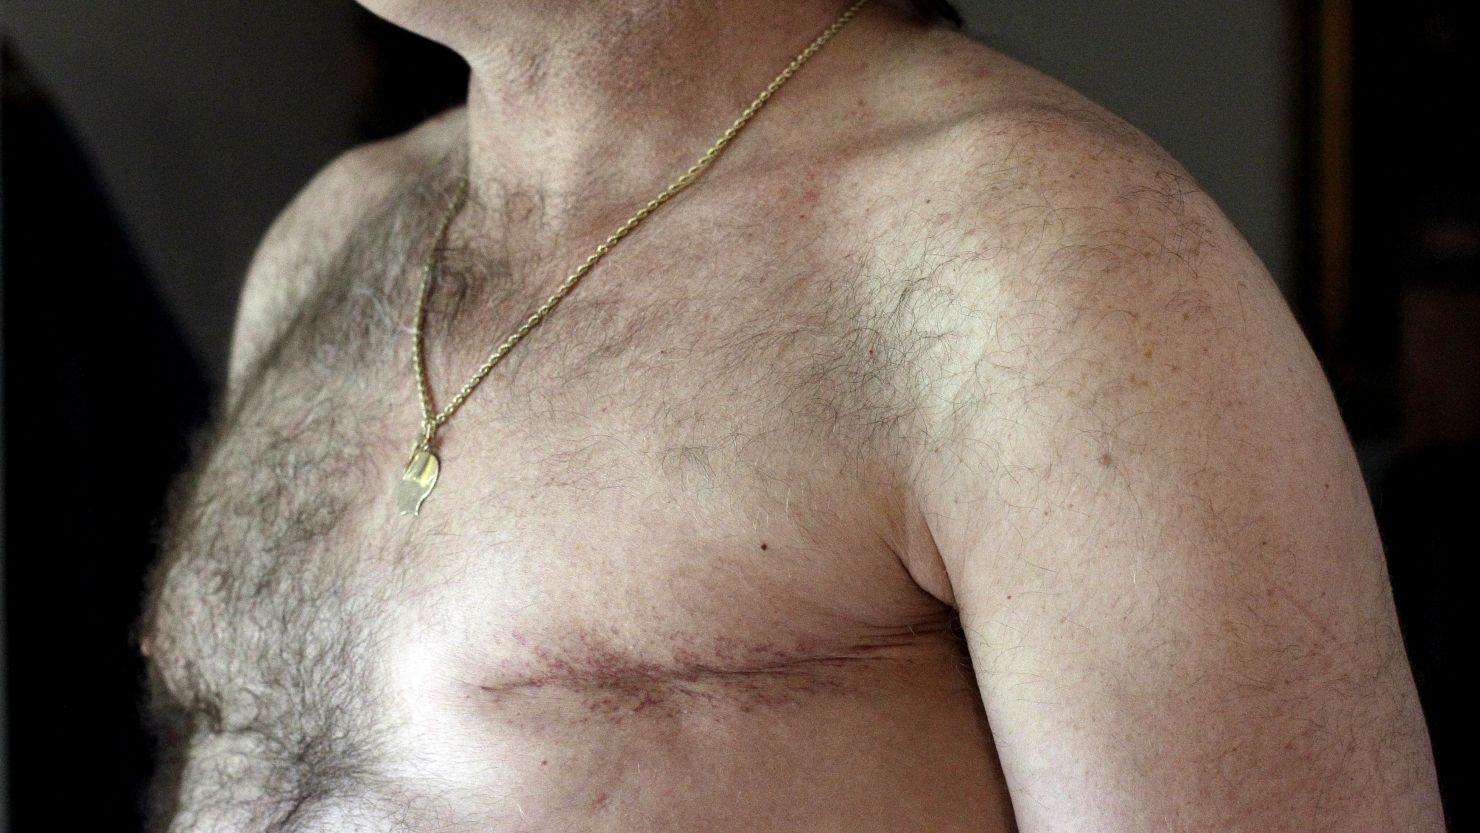 Double mastectomies for men with breast cancer on the rise